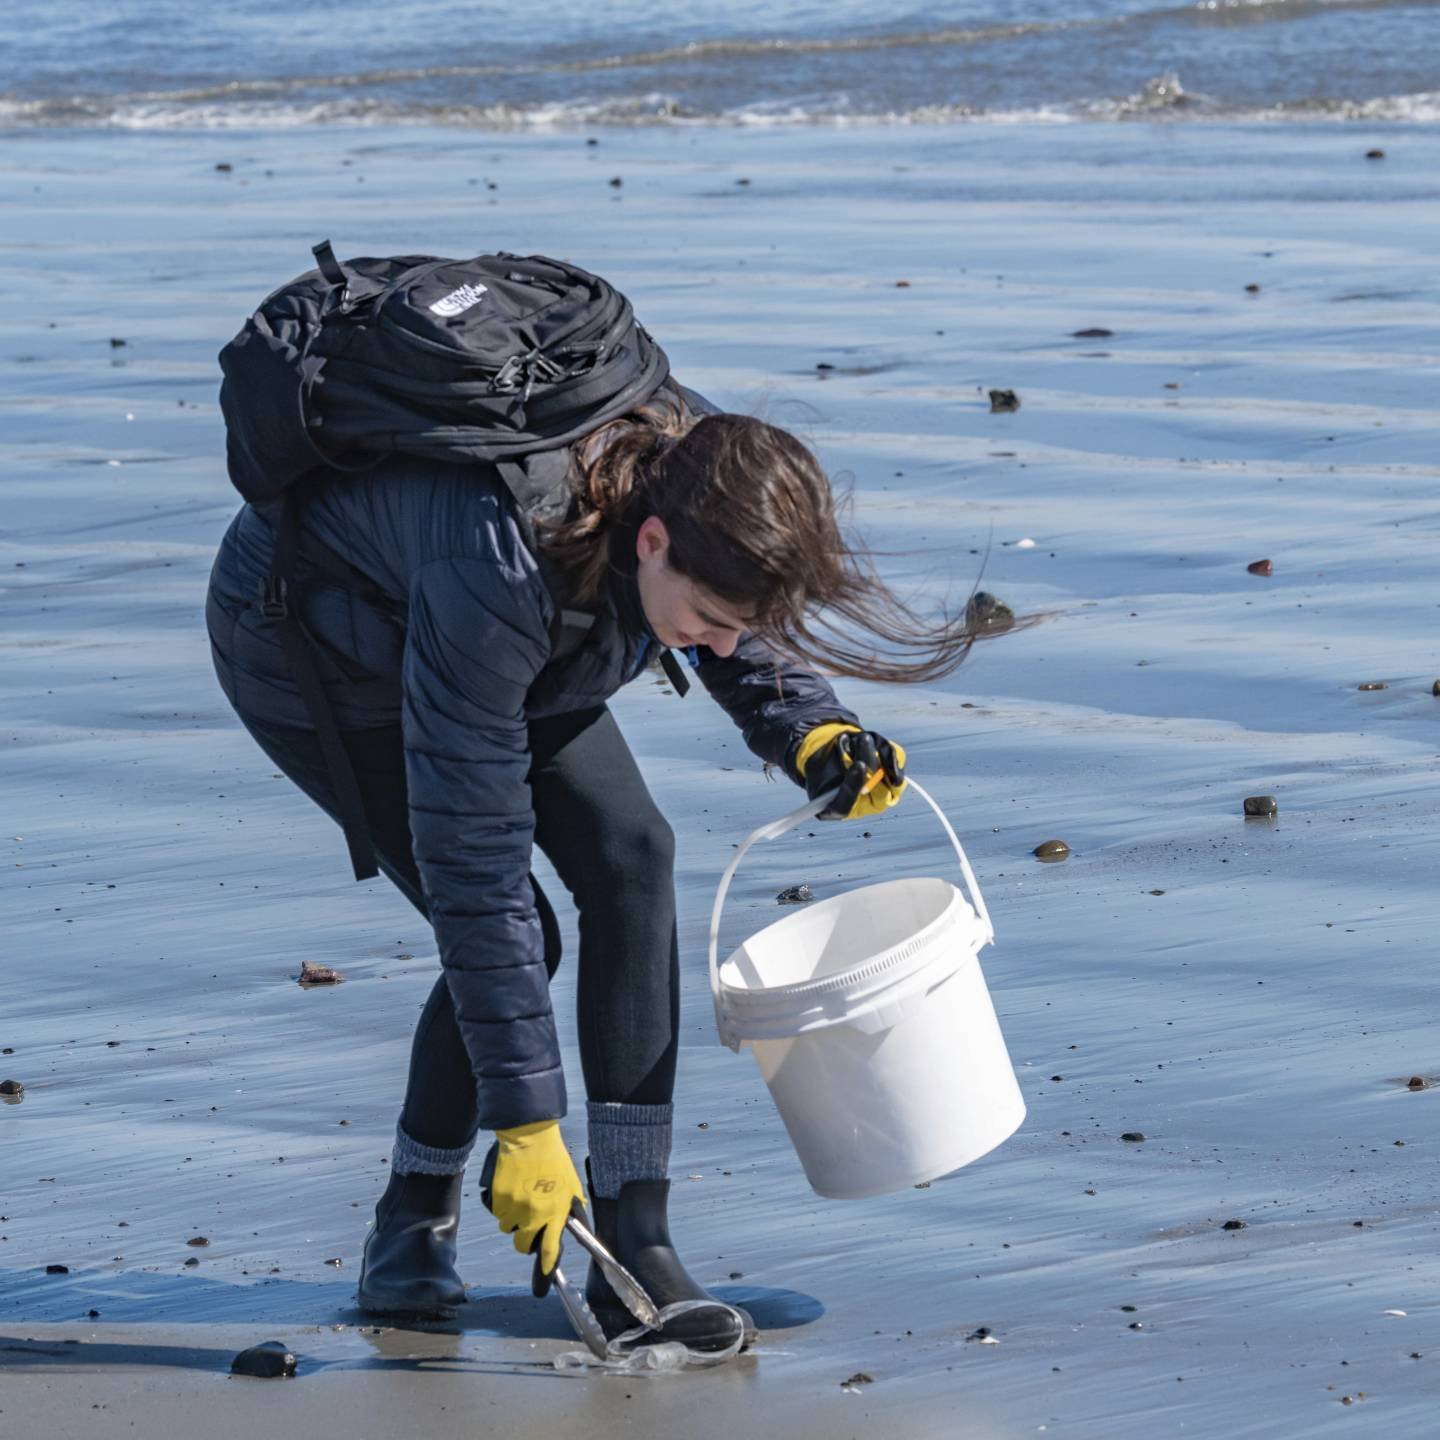 Volunteer collecting trash with tongs on a windy beach